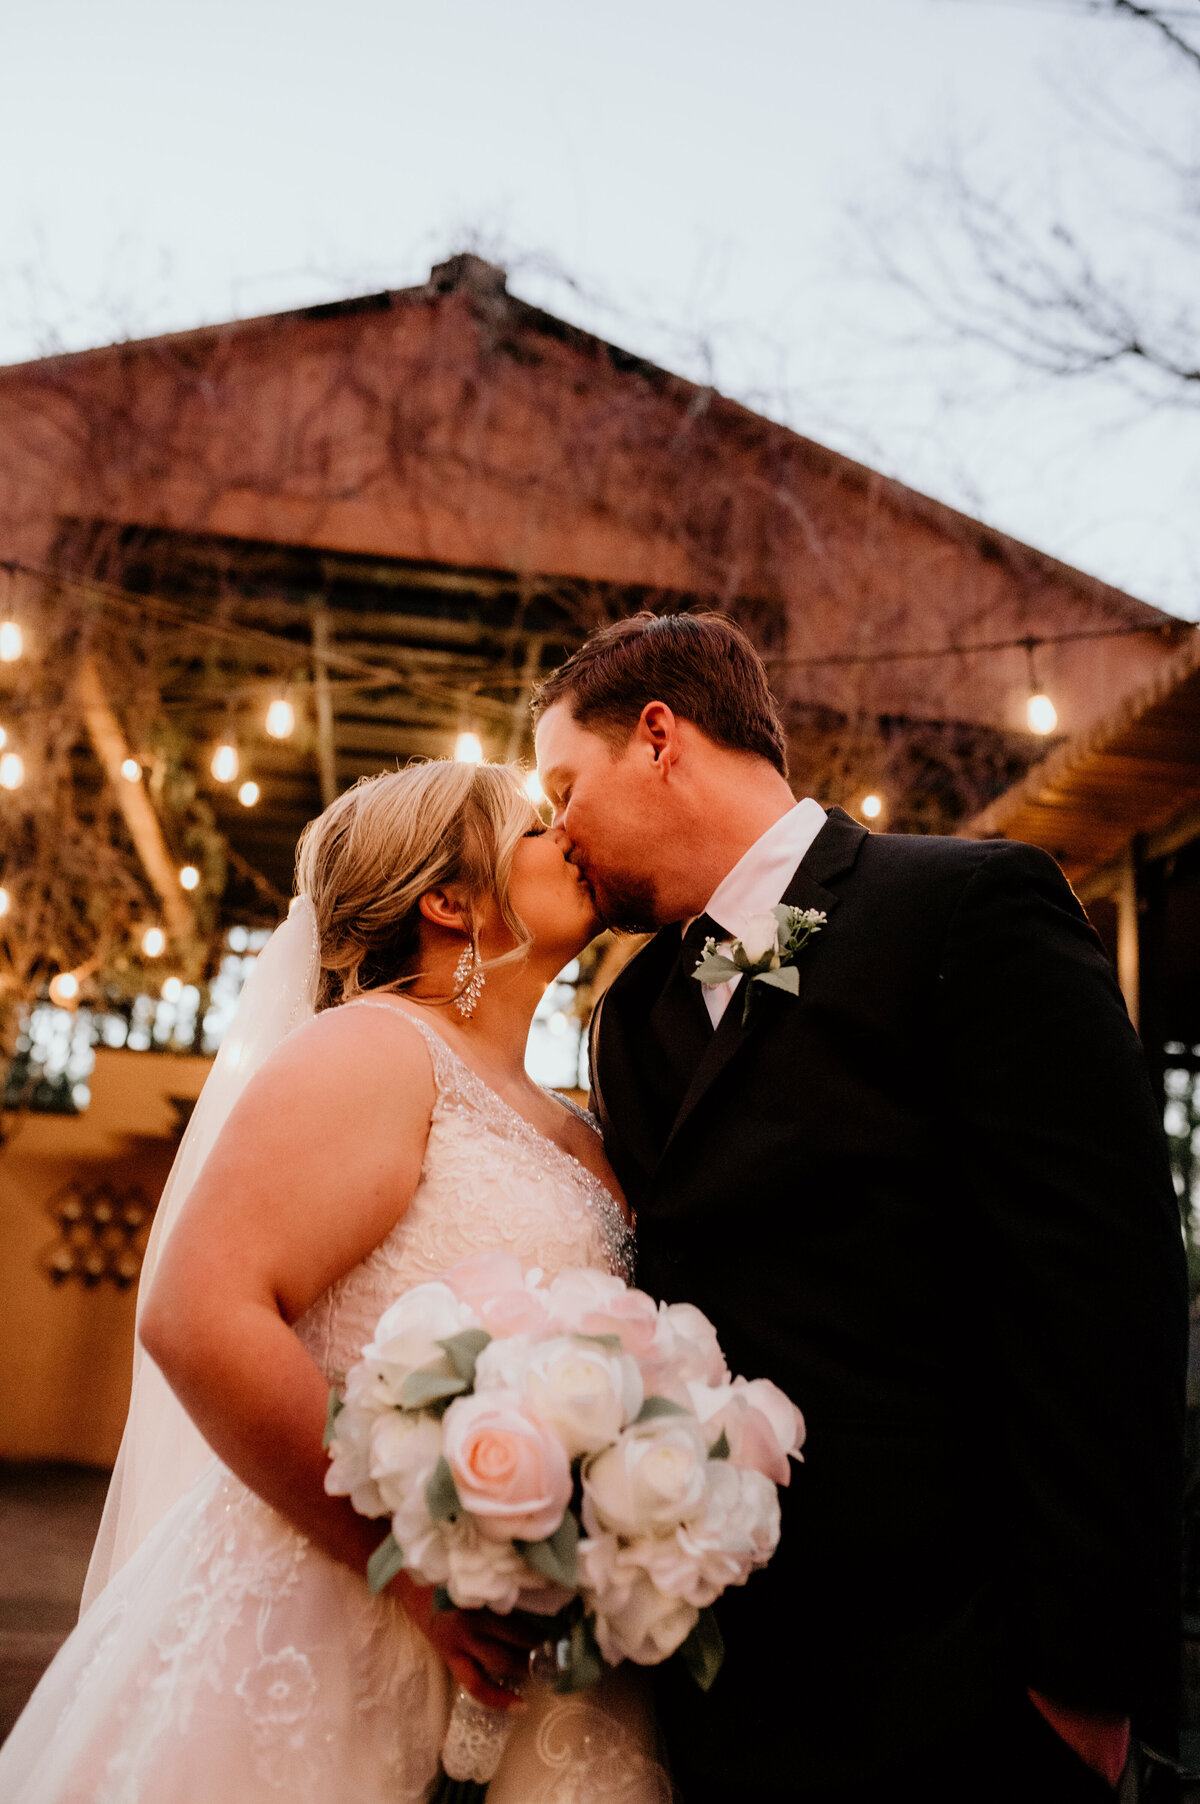 bride and groom kissing under a string of lights at their outdoor wedding venue captured by Little Rock wedding photographer